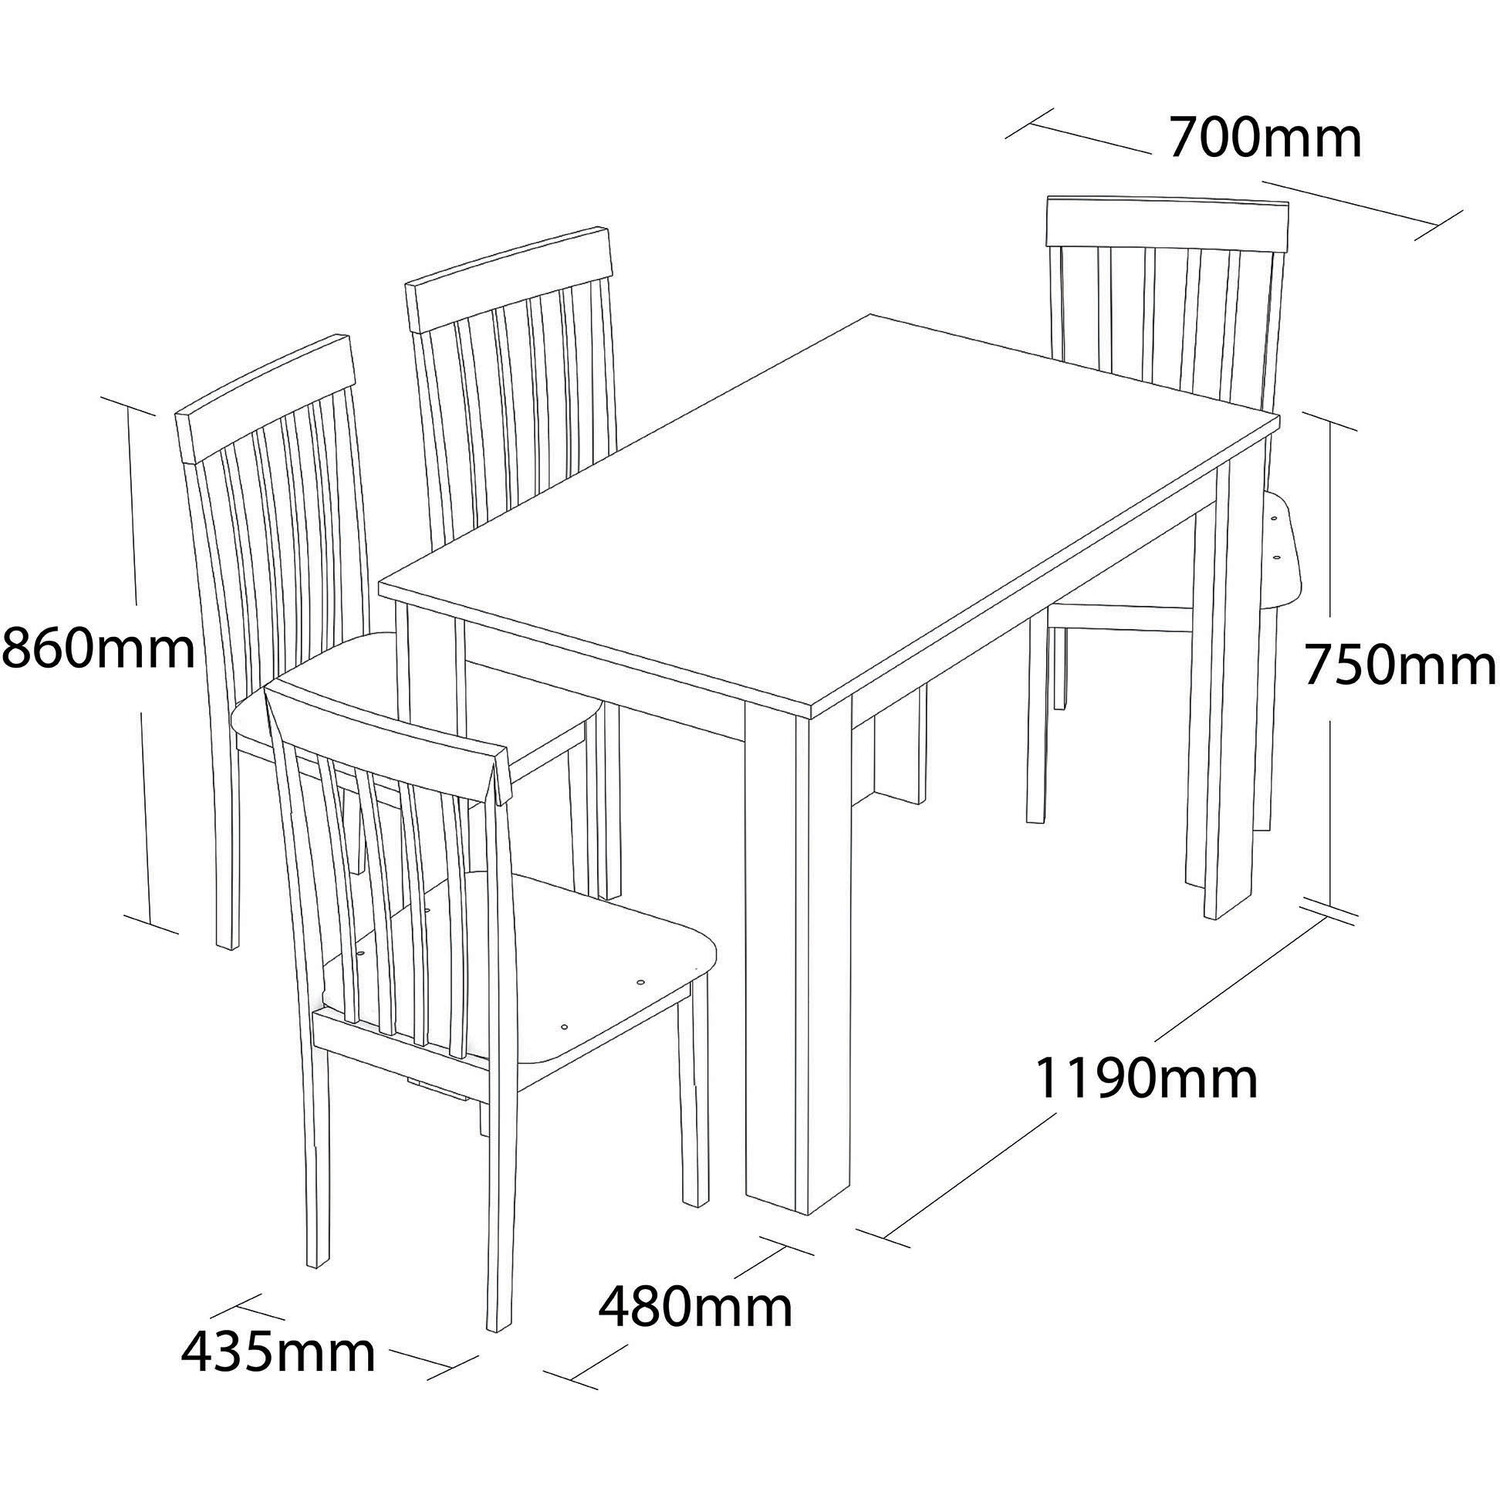 Lexington 4 Seater Wooden Dining Set Cream and White Image 2